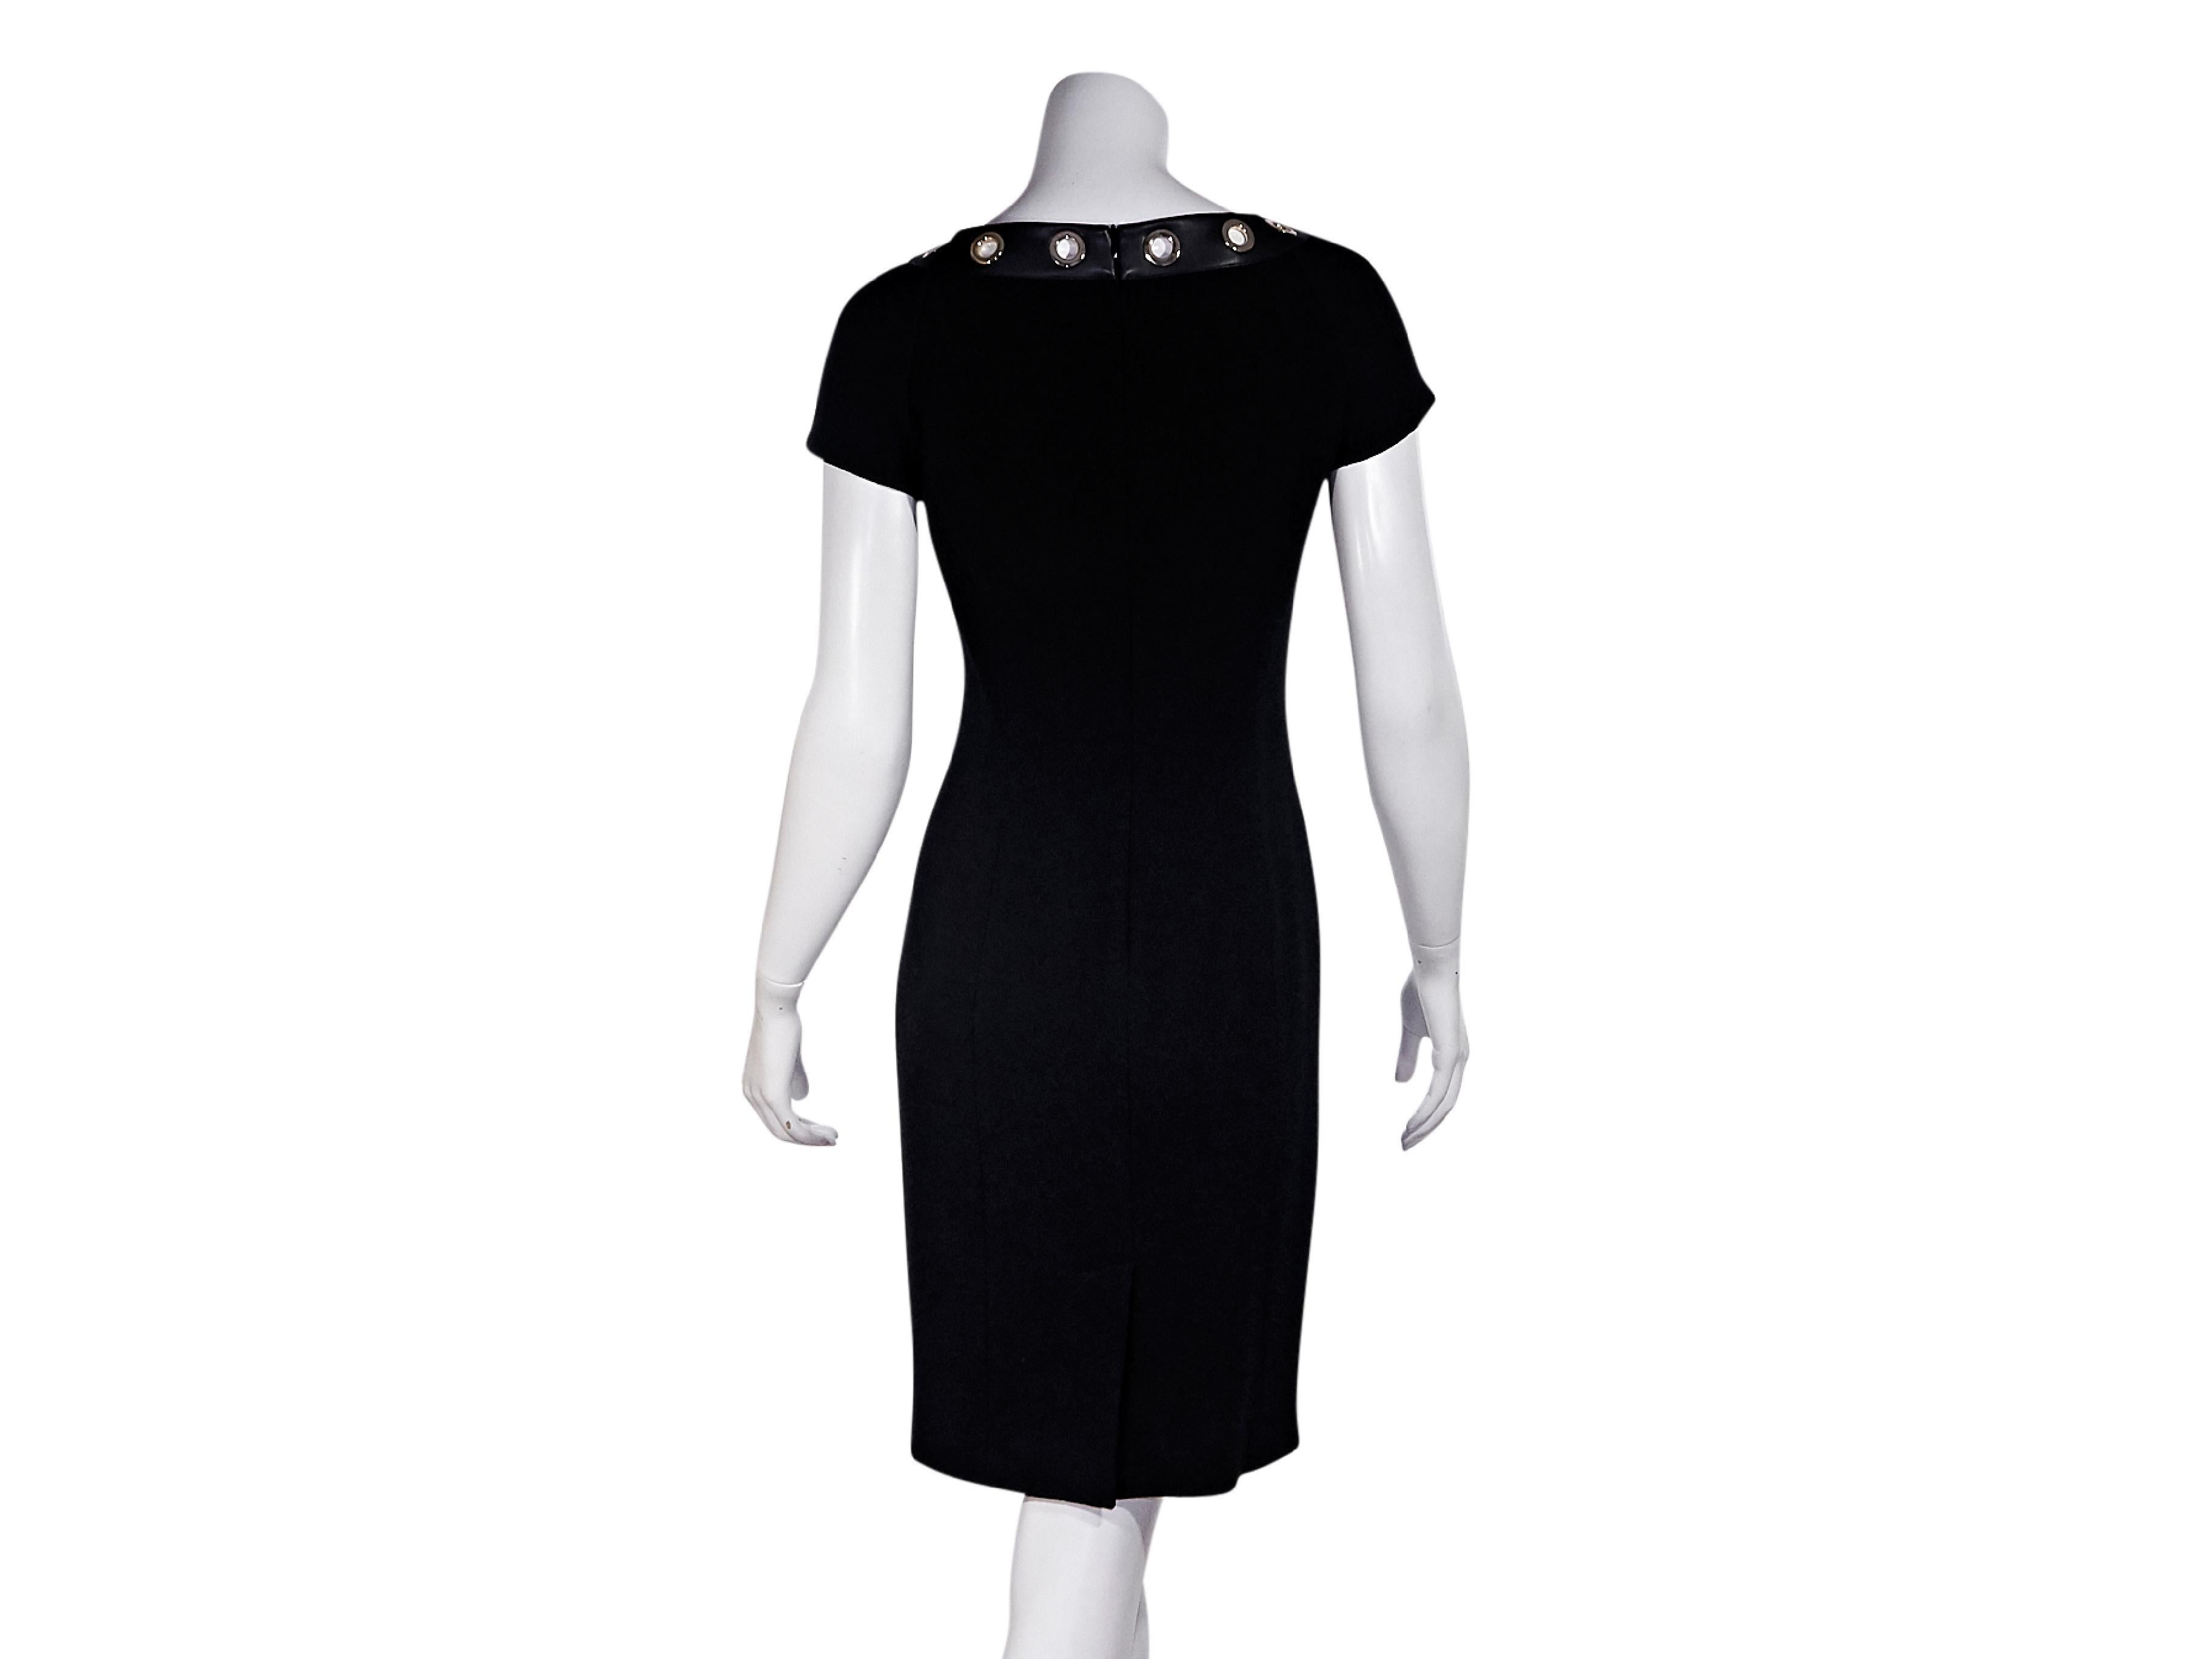 Product details:  Black sheath dress by Moschino Boutique.  Scoopneck accented with grommets.  Short sleeves.  Concealed back zip closure.  30